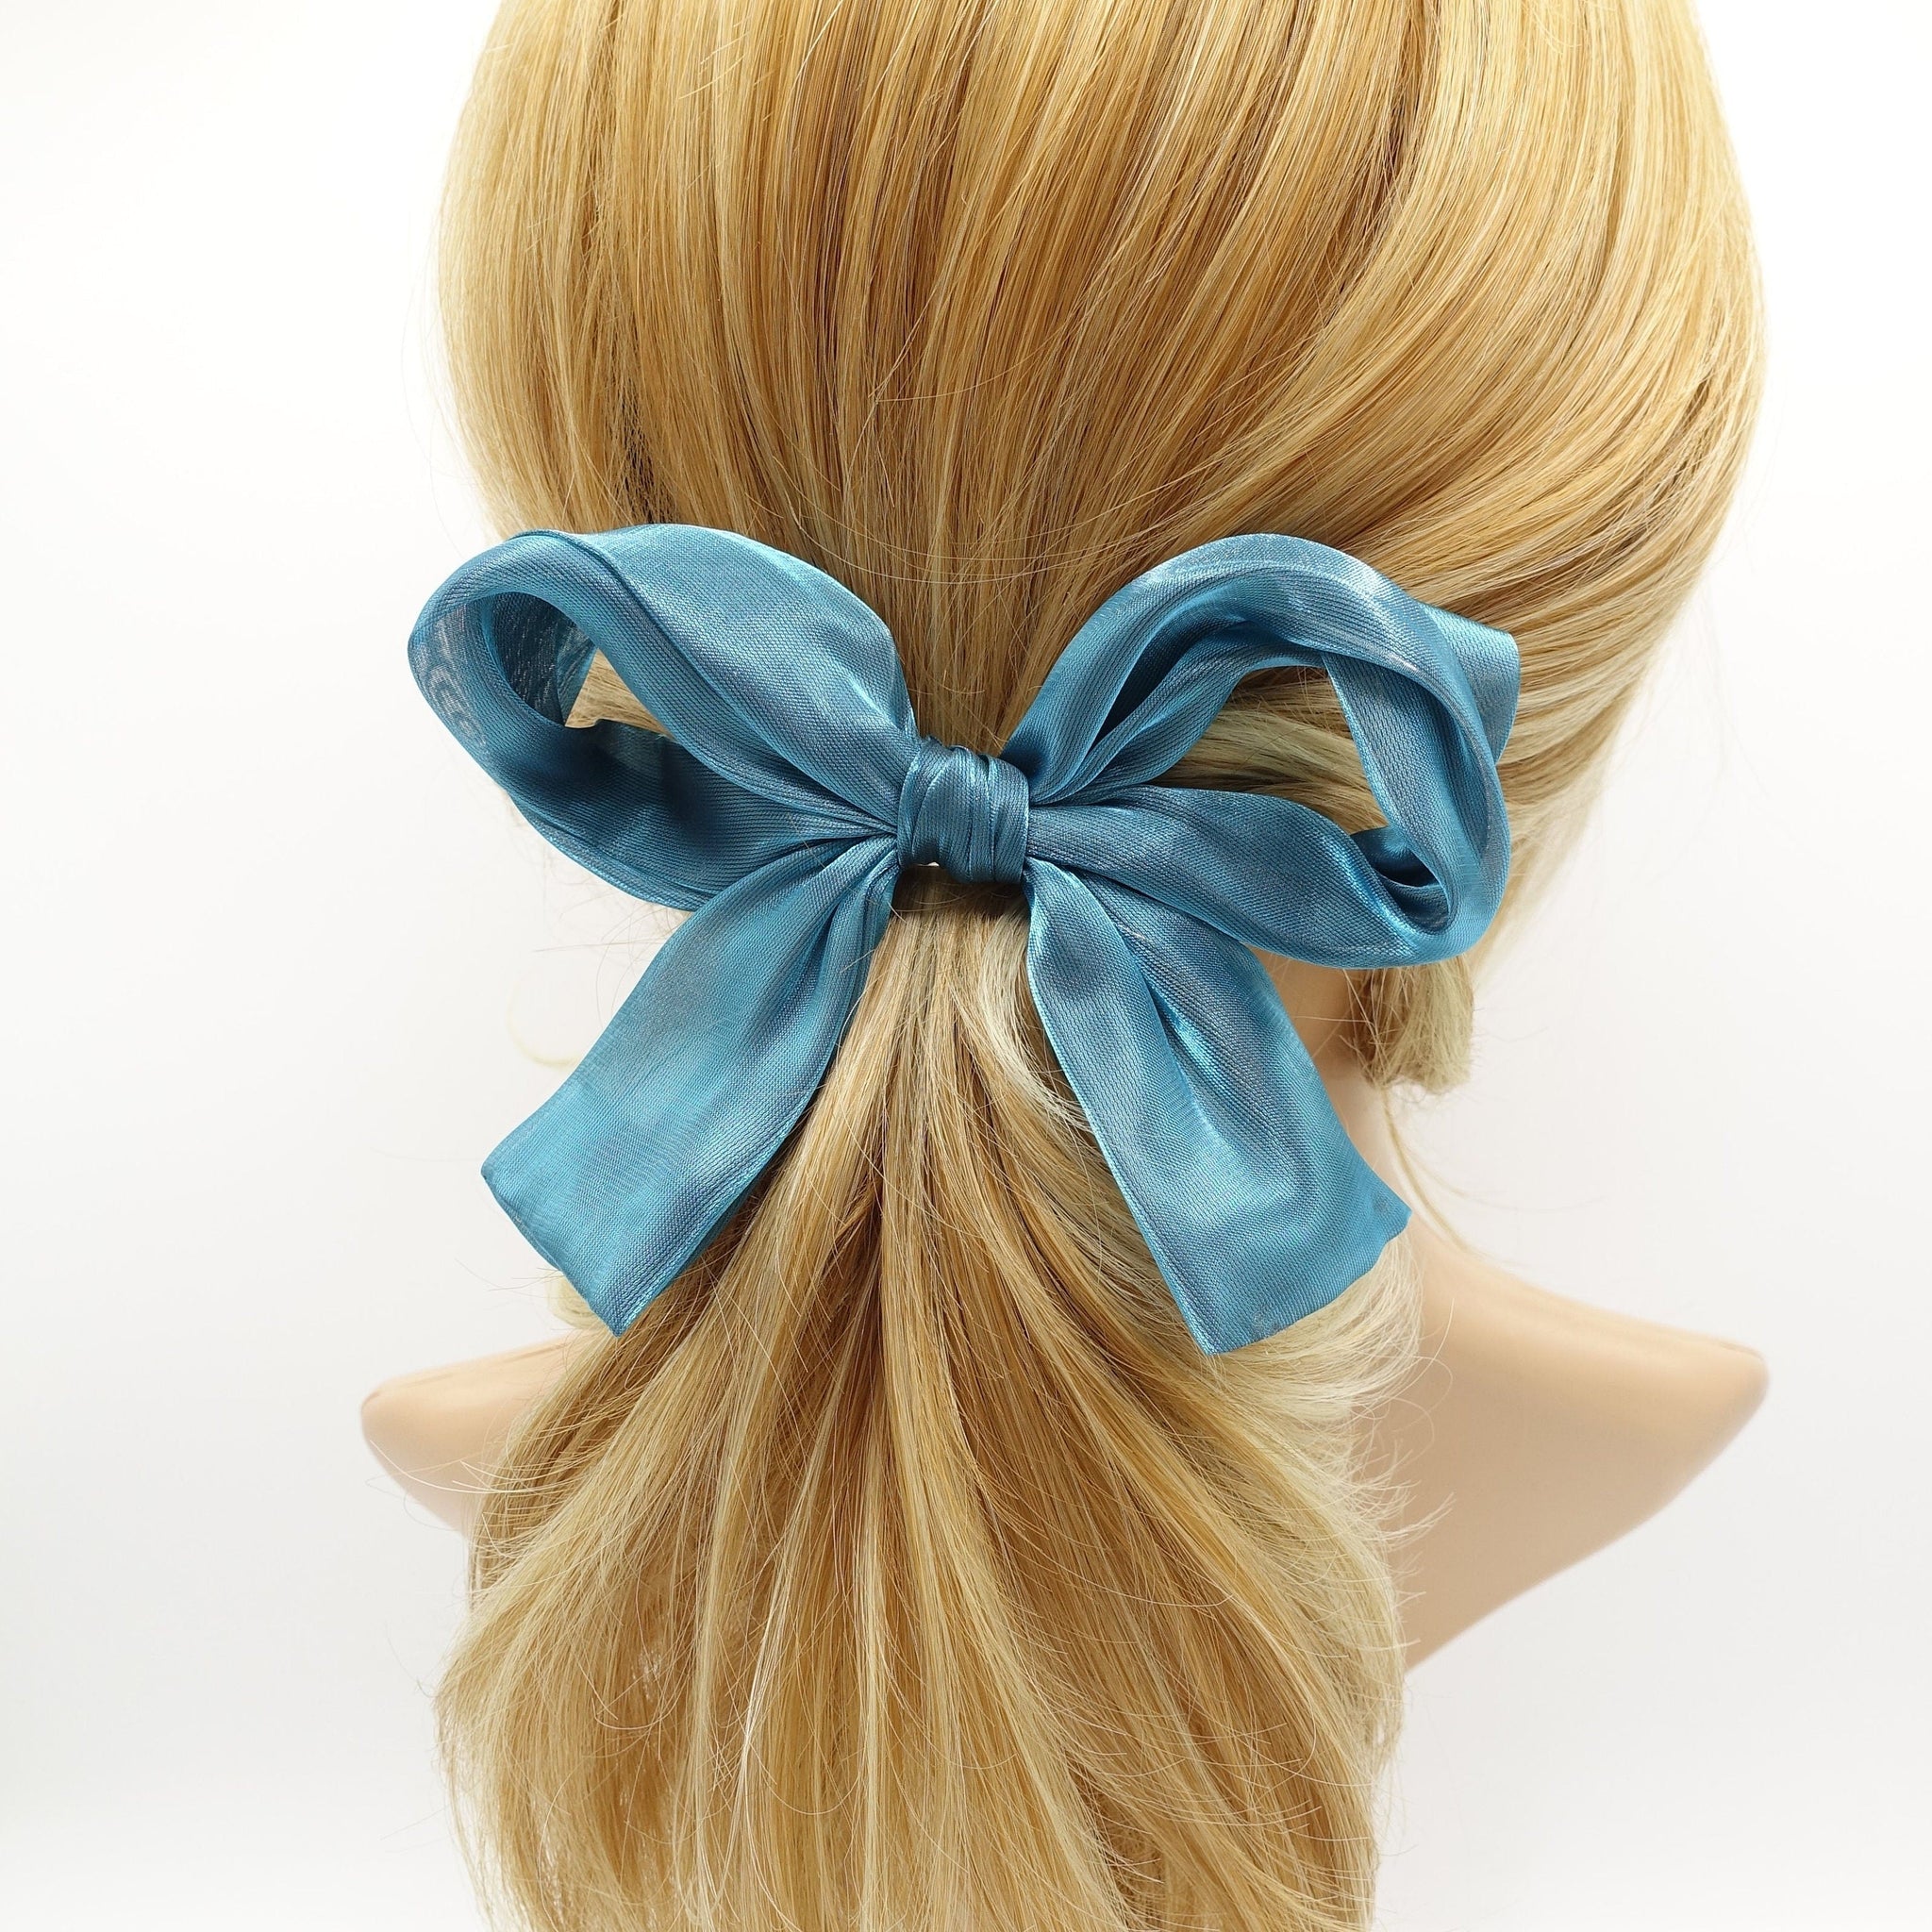 veryshine.com Barrette (Bow) Blue green organza wired hair bow colorful translucent fabric tail knotted bow french barrette women hair accessory